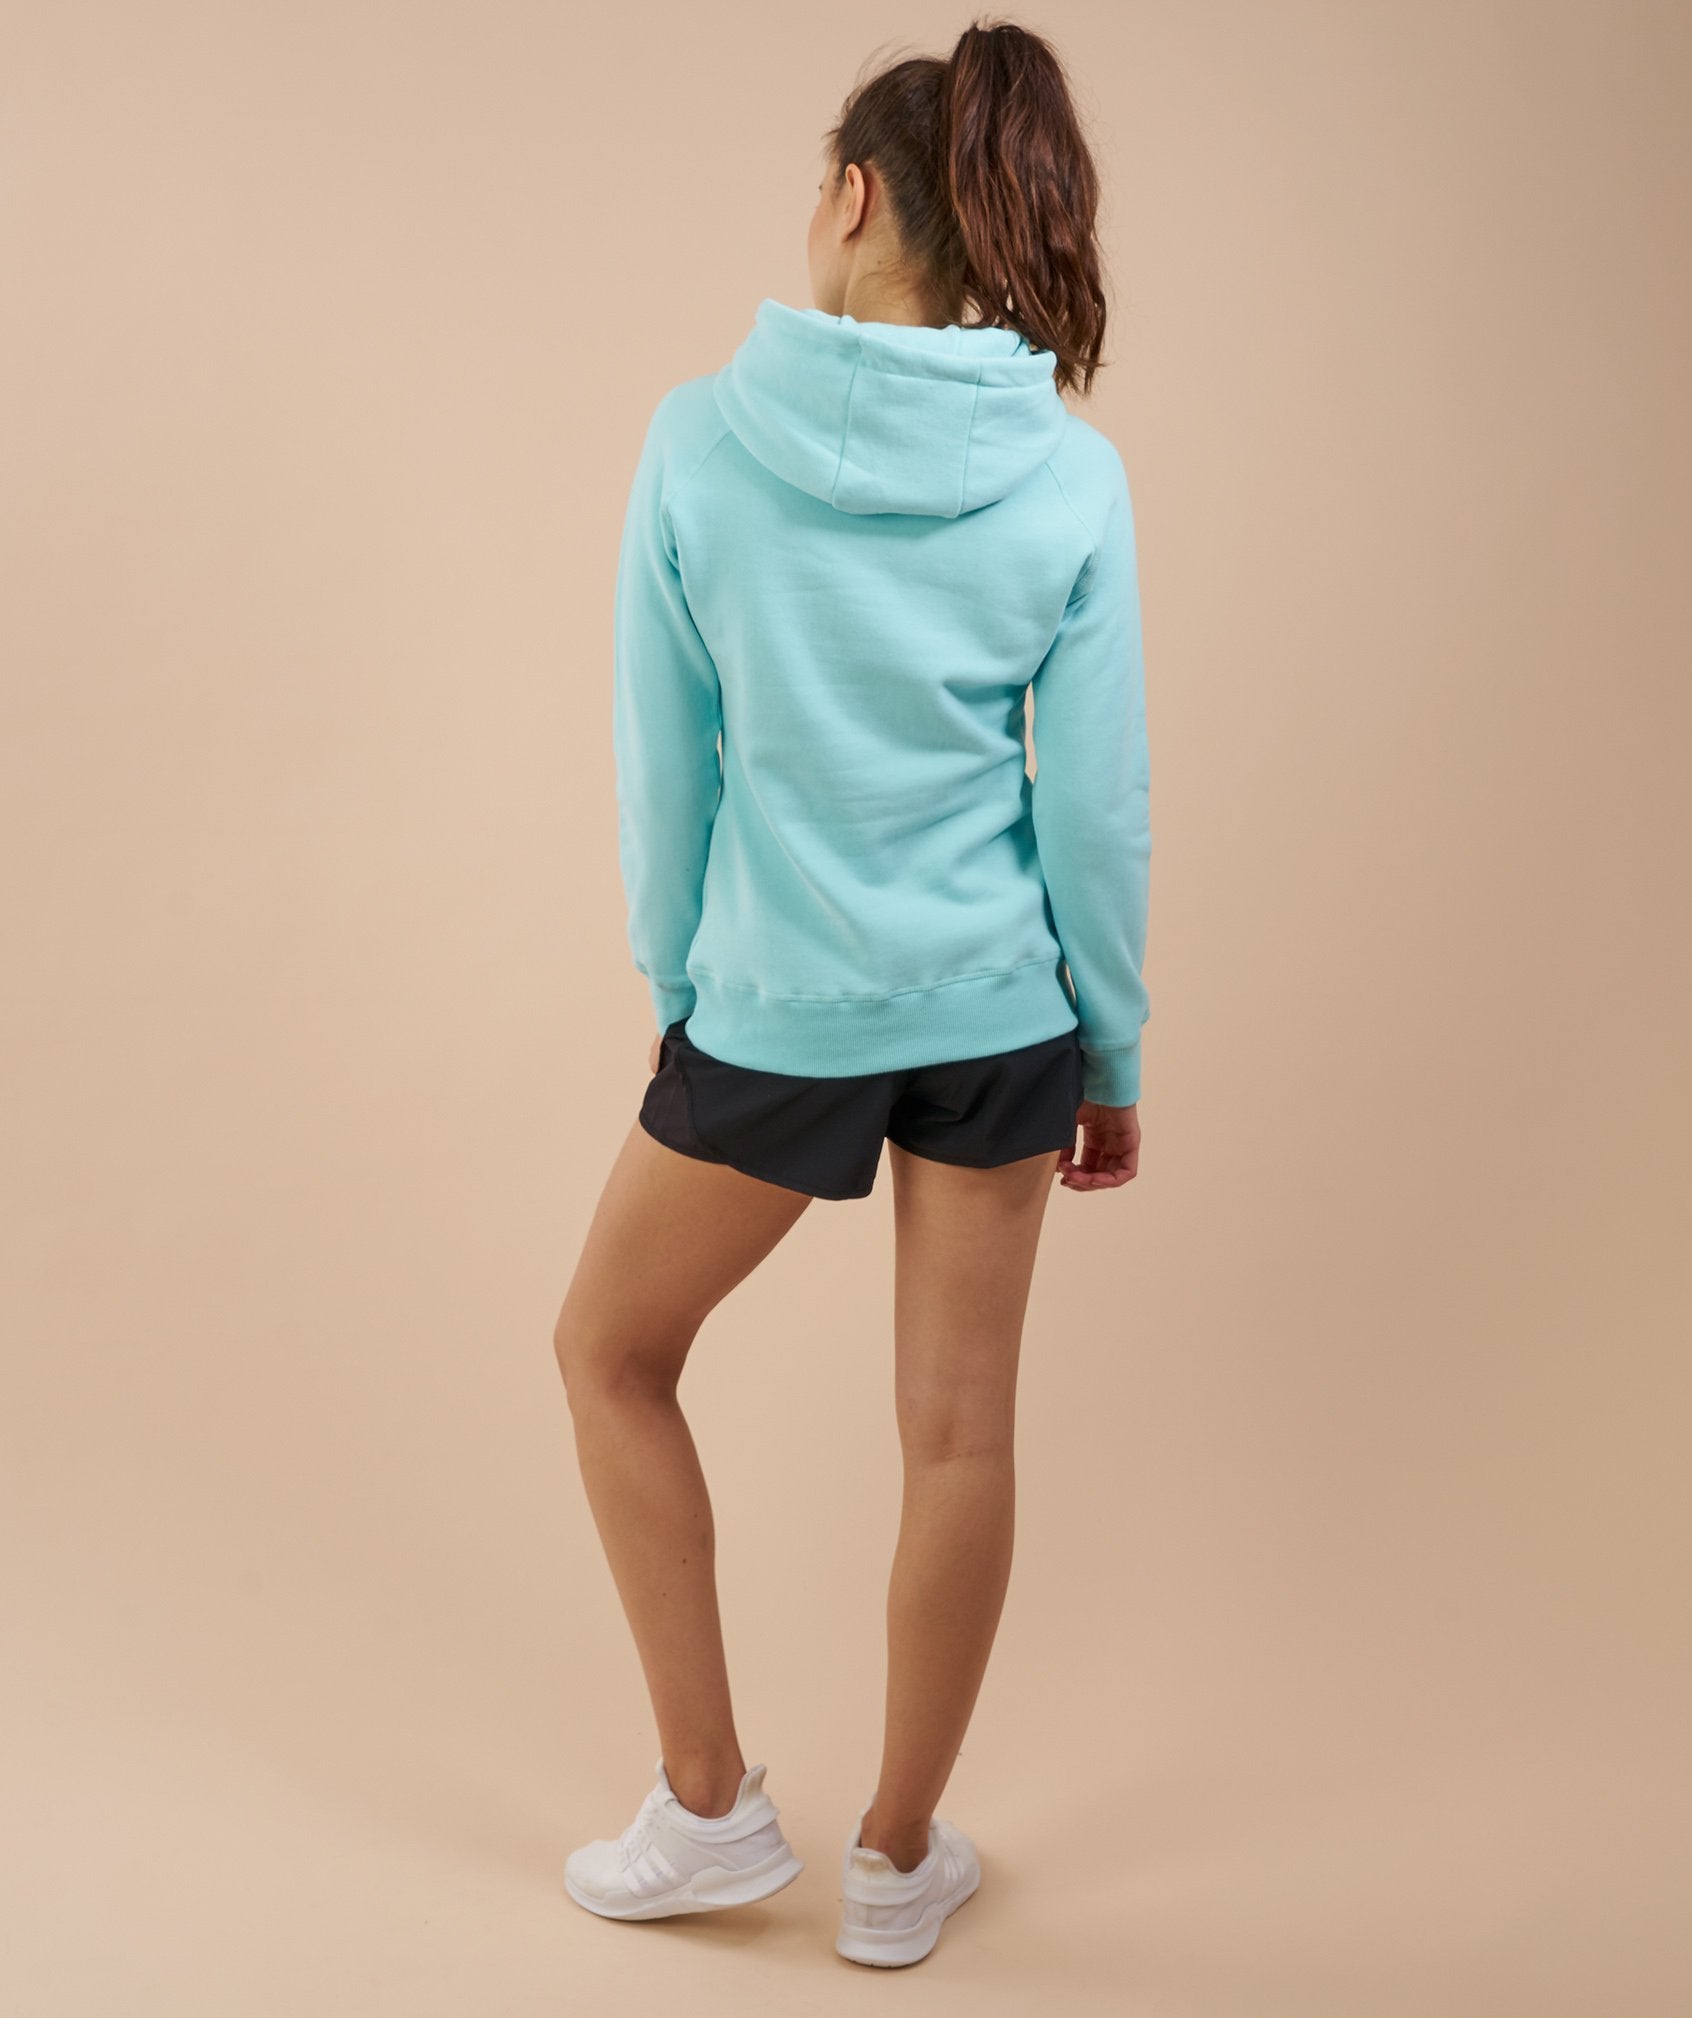 Women's Crest Hoodie in Pale Turquoise - view 2